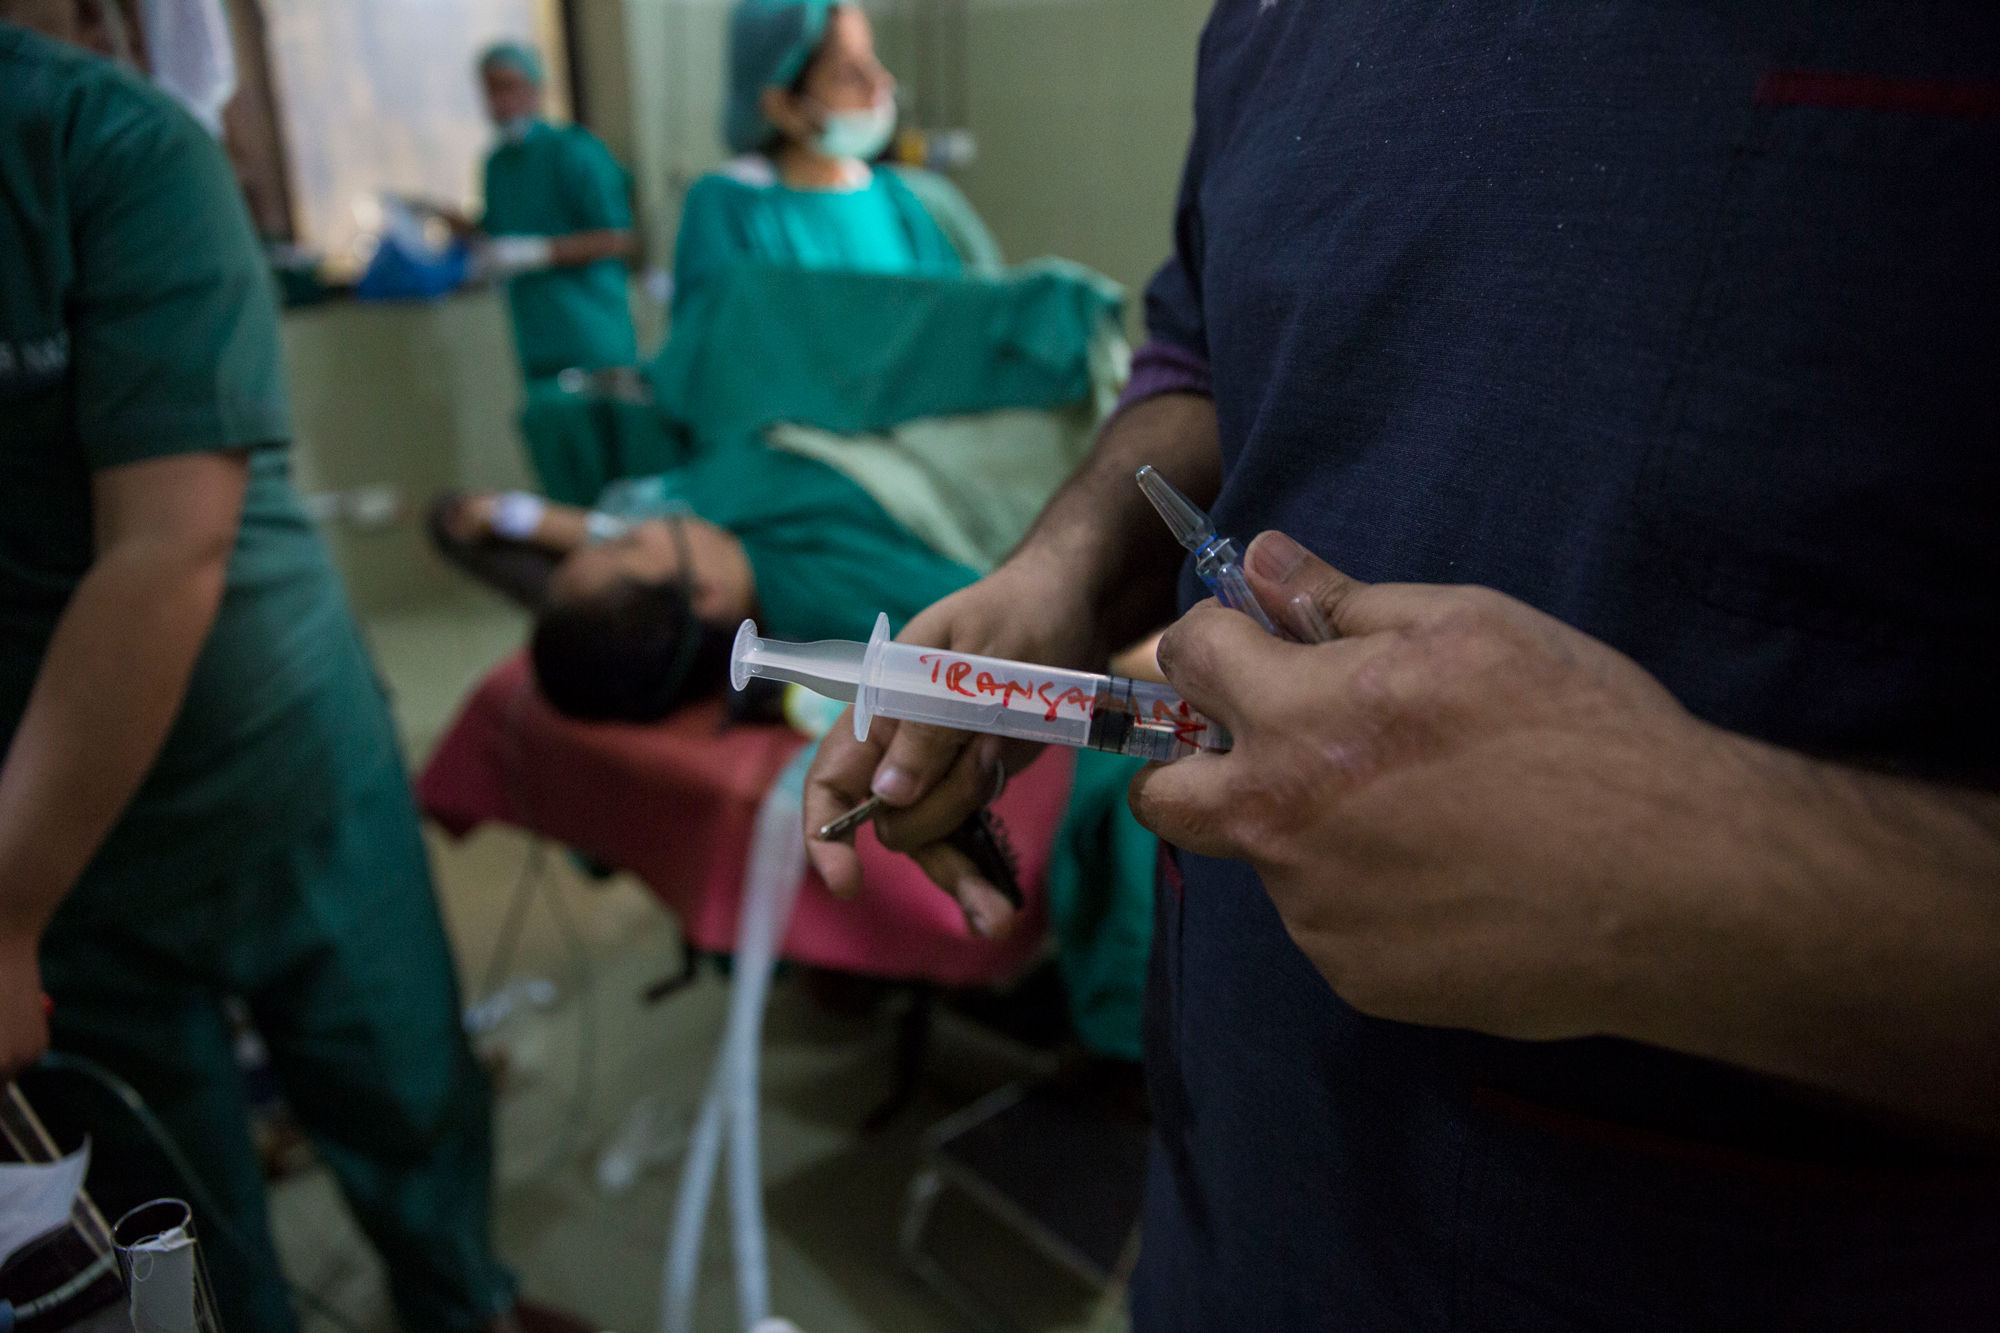 An operating theatre assistant holds a dose of tranexamic acid before the C-section begins as they are anticipating severe haemorrhaging. Holy Family Hospital, Rawalpindi. Saiyna Bashir © Wellcome Trust